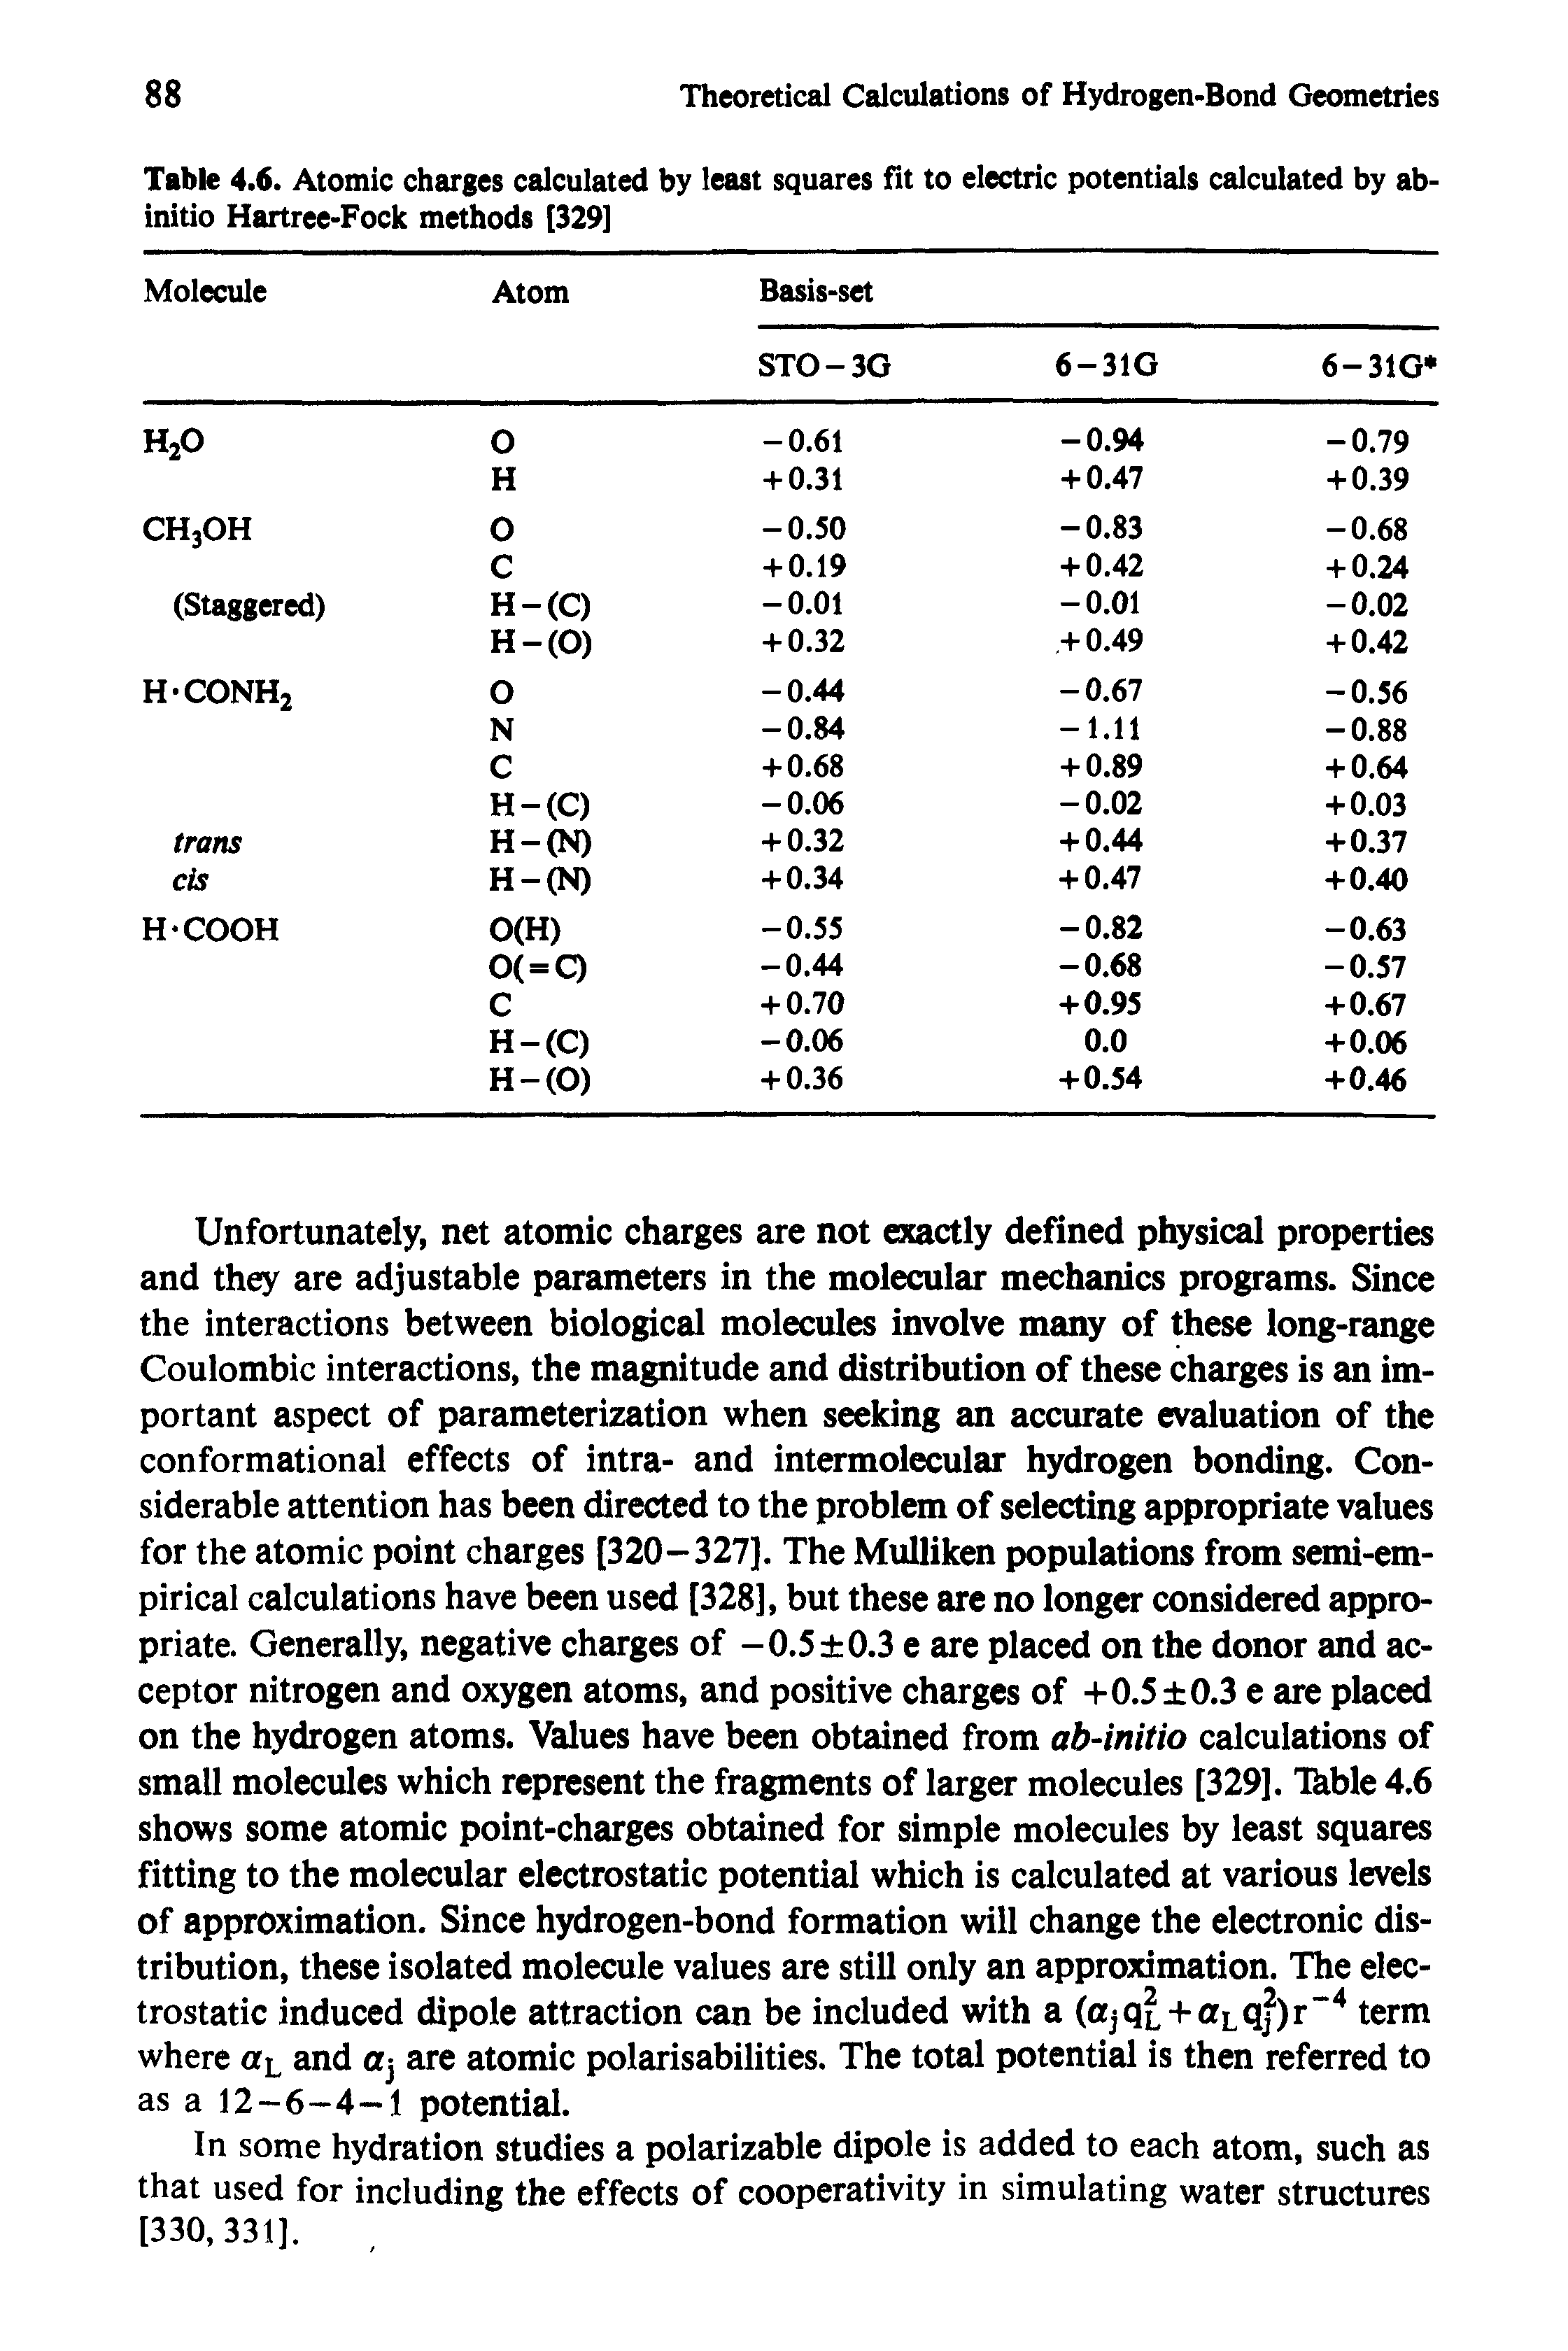 Table 4.6. Atomic charges calculated by least squares fit to electric potentials calculated by ab-initio Hartree-Fock methods [329] ...